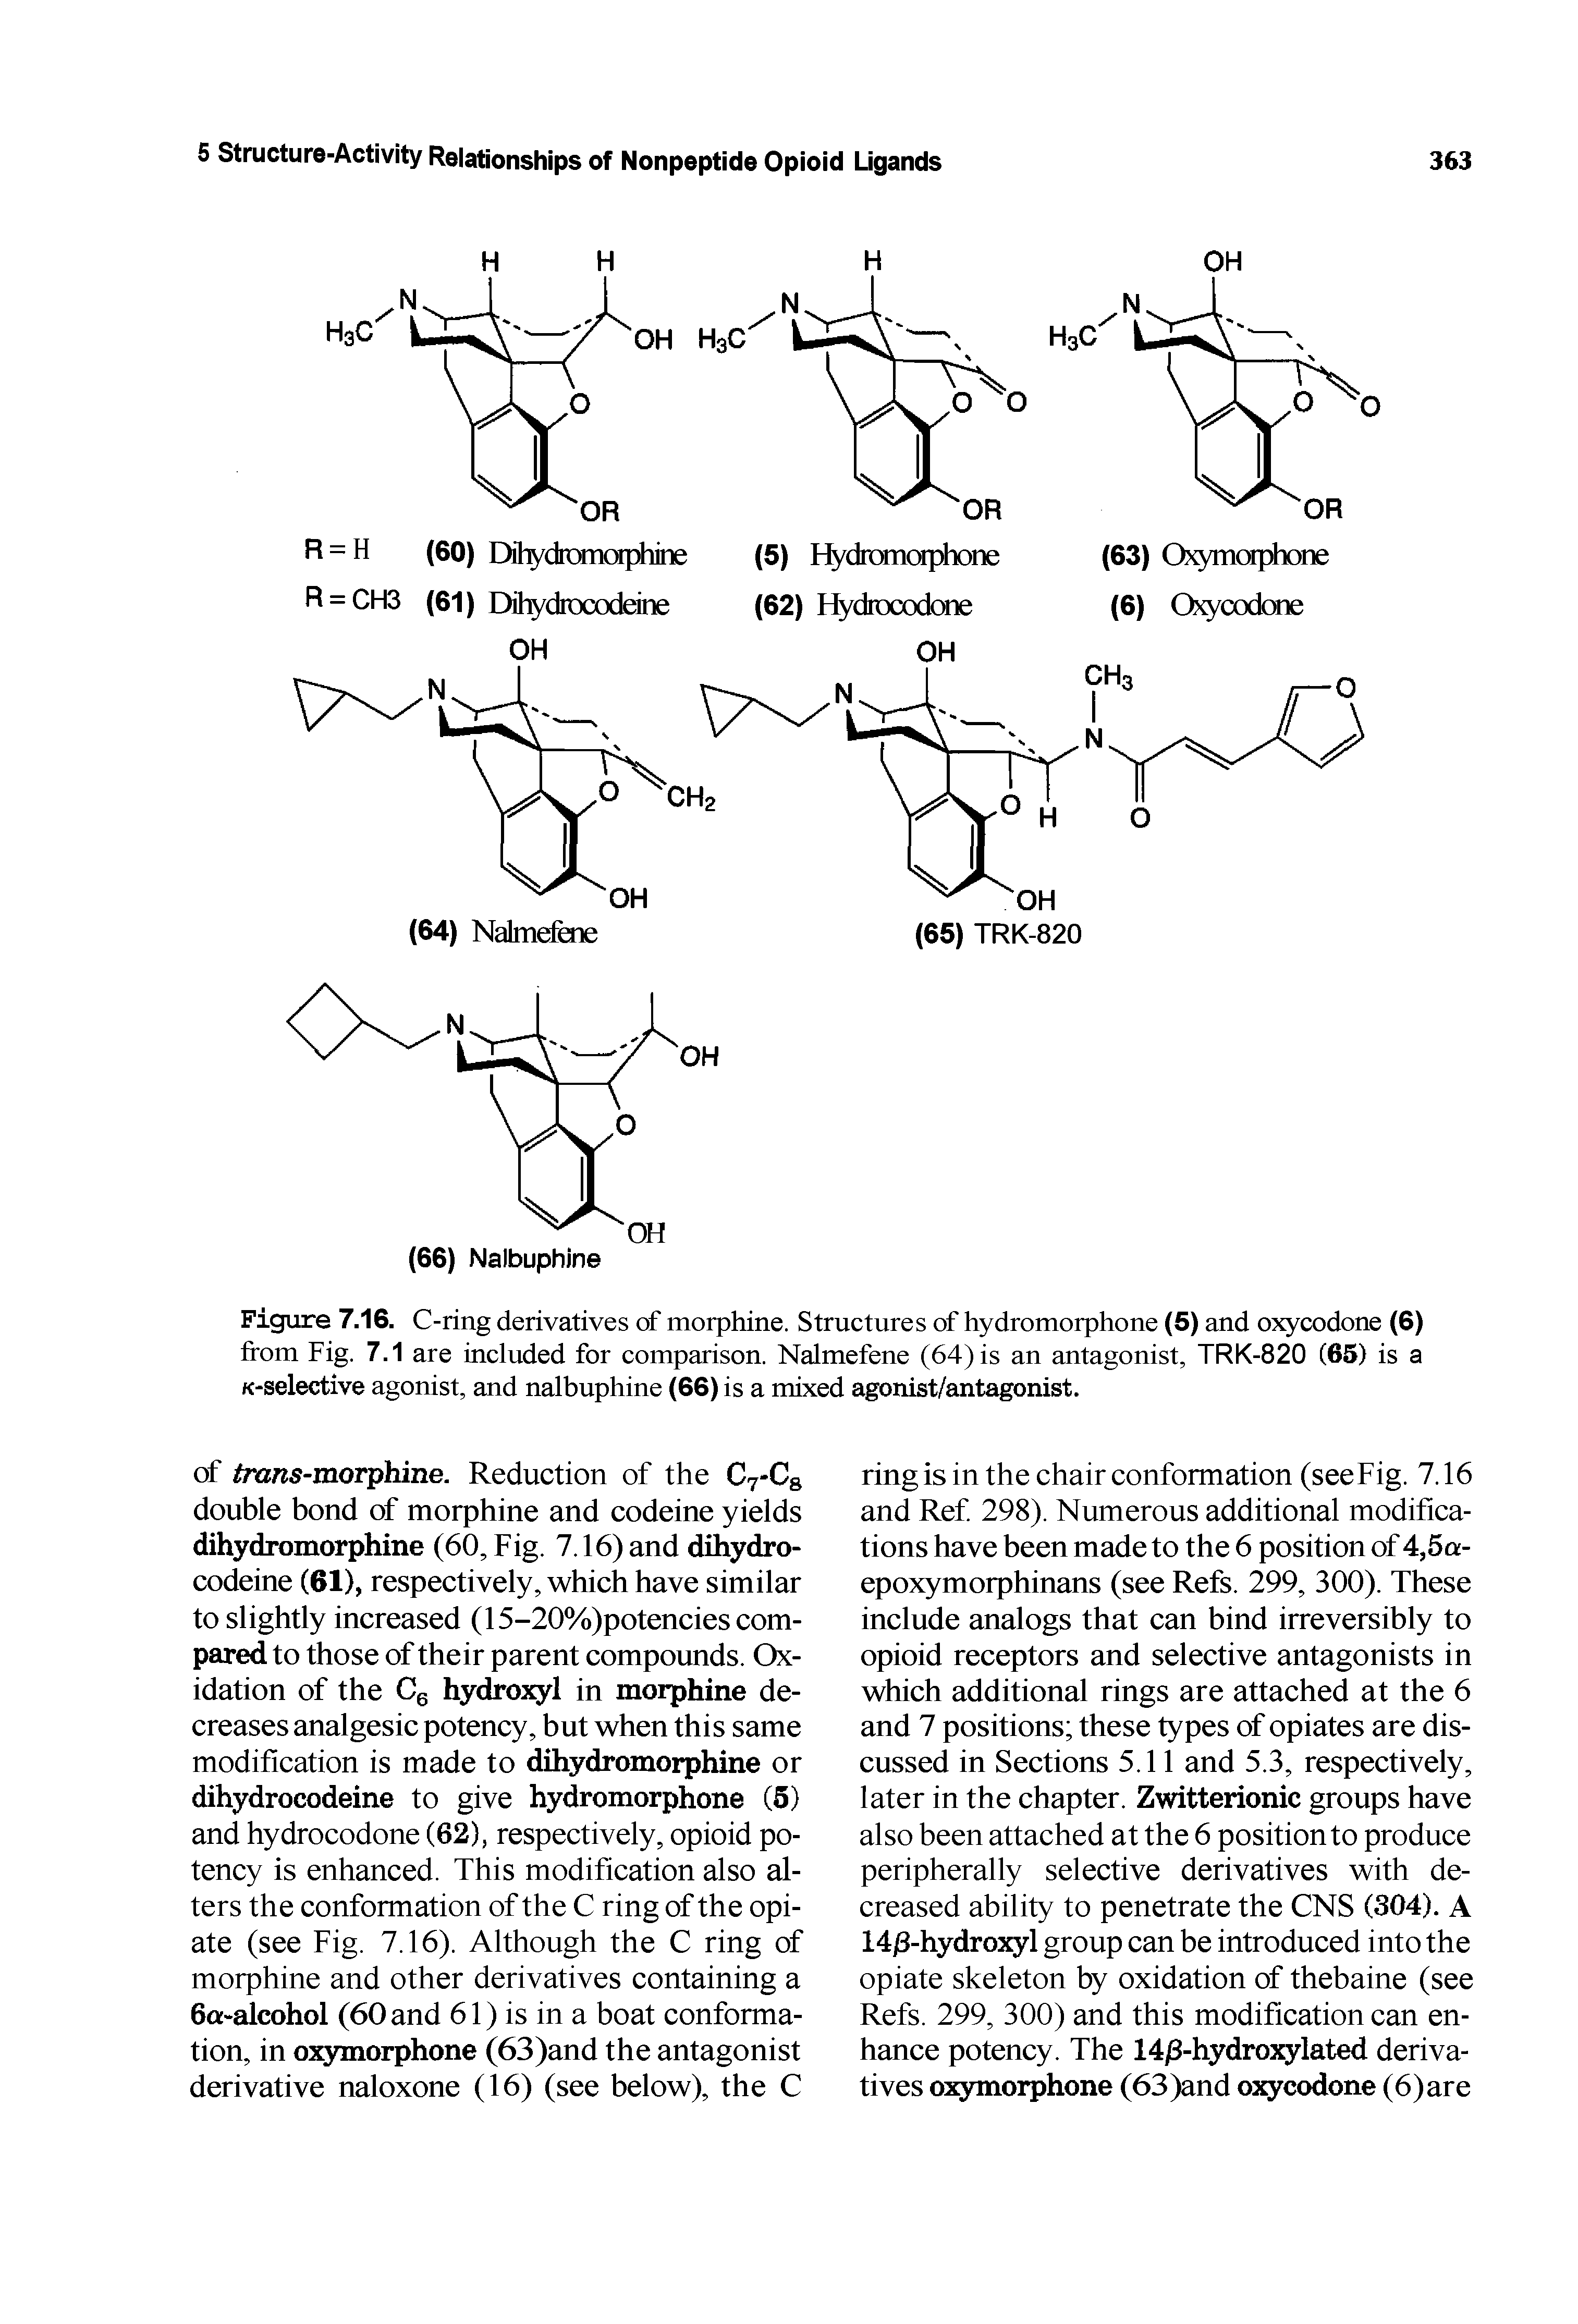 Figure 7.16. C-ring derivatives of morphine. Structures of hydromorphone (5) and oxycodone (6) from Fig. 7.1 are included for comparison. Nalmefene (64) is an antagonist, TRK-820 (65) is a K-selective agonist, and nalbuphine (66) is a mixed agonist/antagonist.